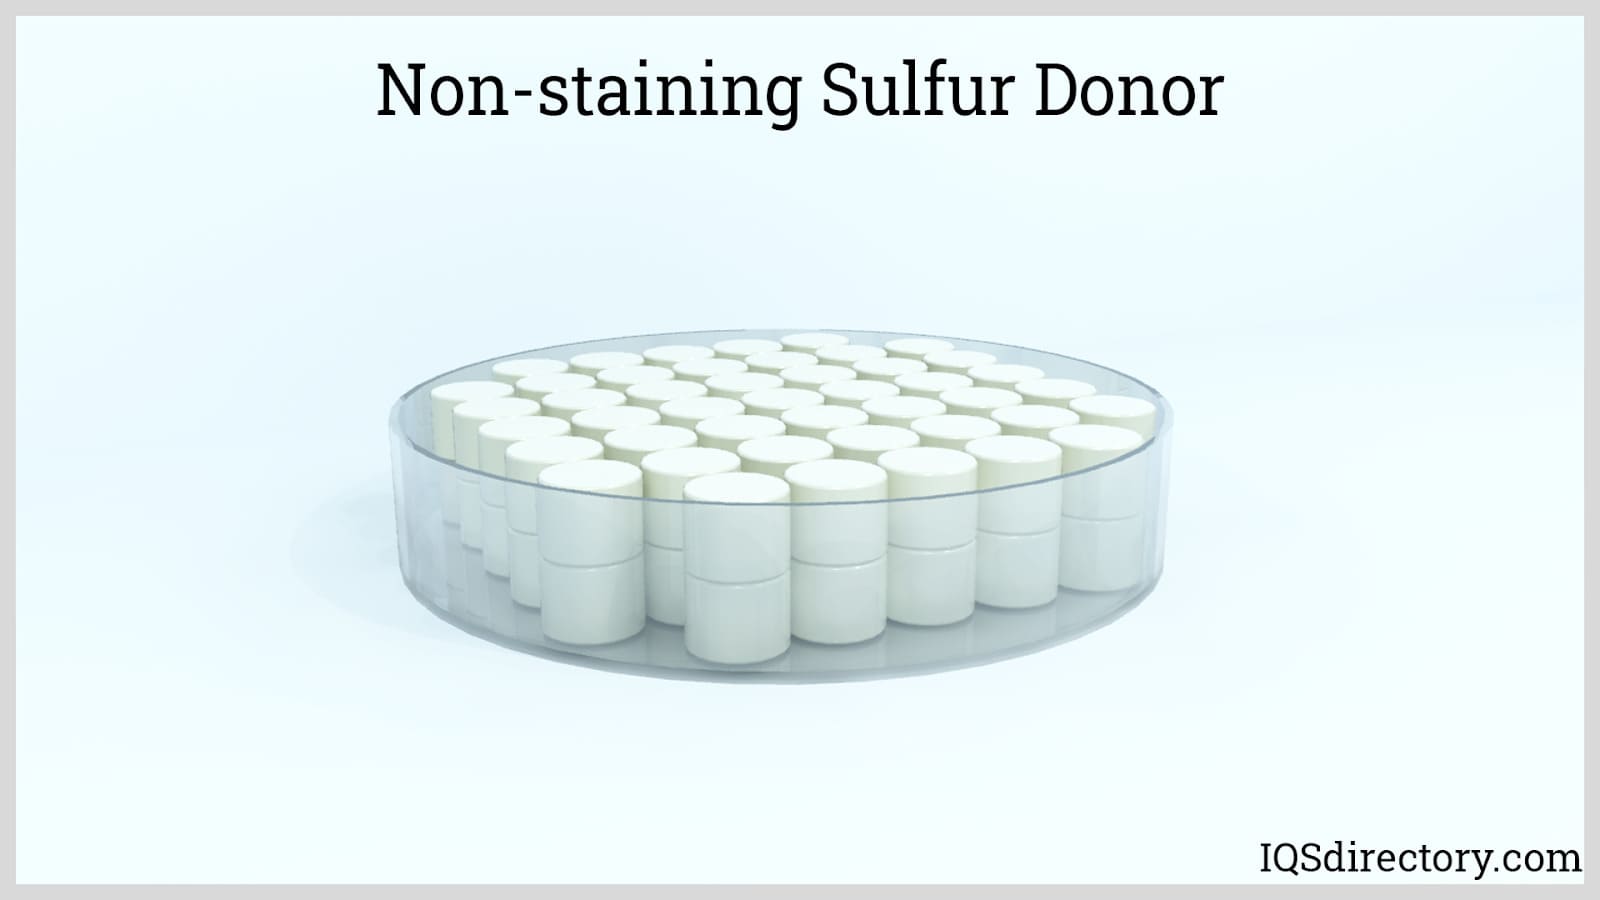 Non-staining Sulfur Donor